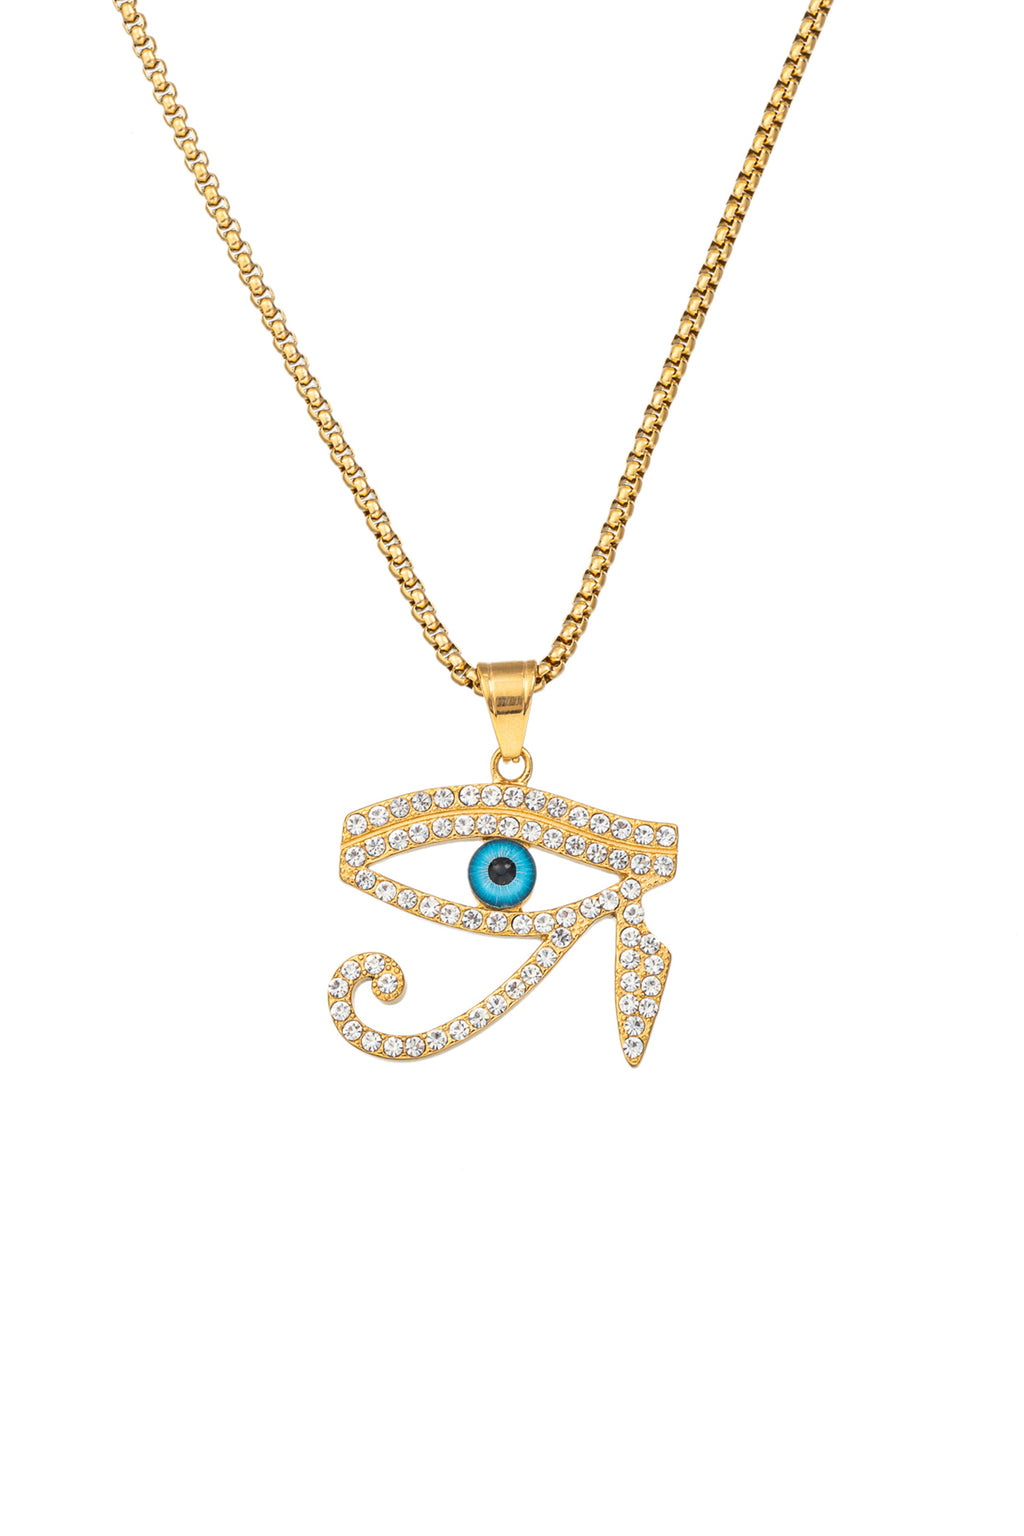 Gold tone titanium eye pendant necklace studded with CZ crystals.